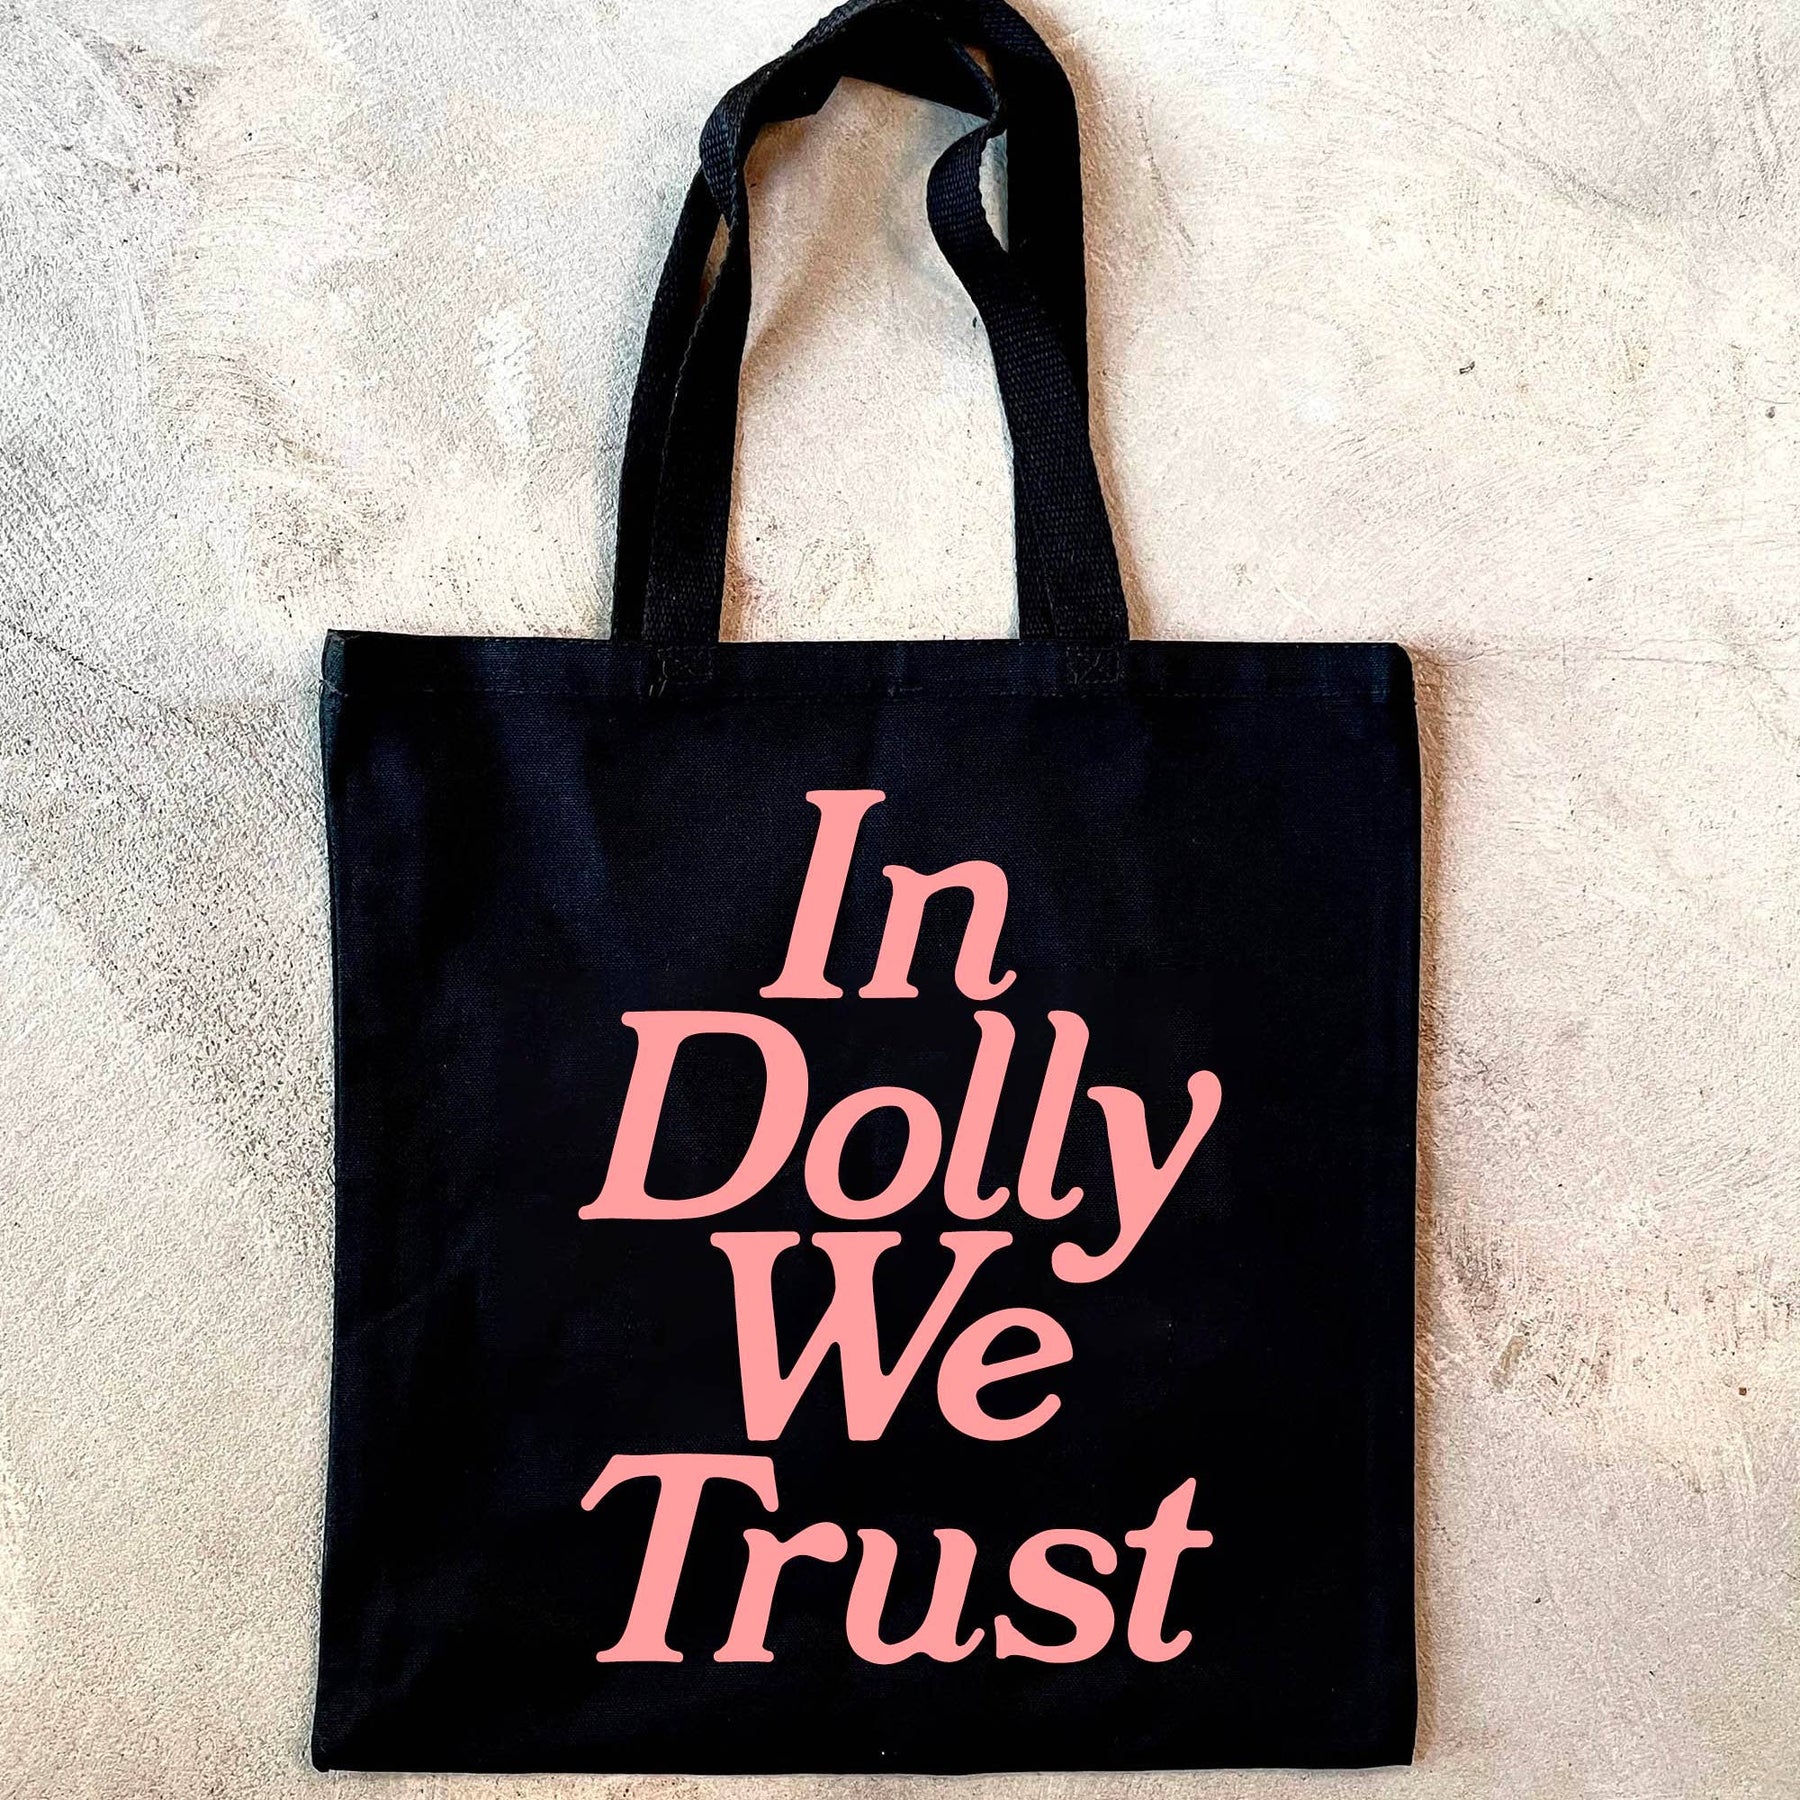 A black tote bag with pink text In Dolly We Trust and a woven shoulder strap. Durable and spacious for all your essentials.